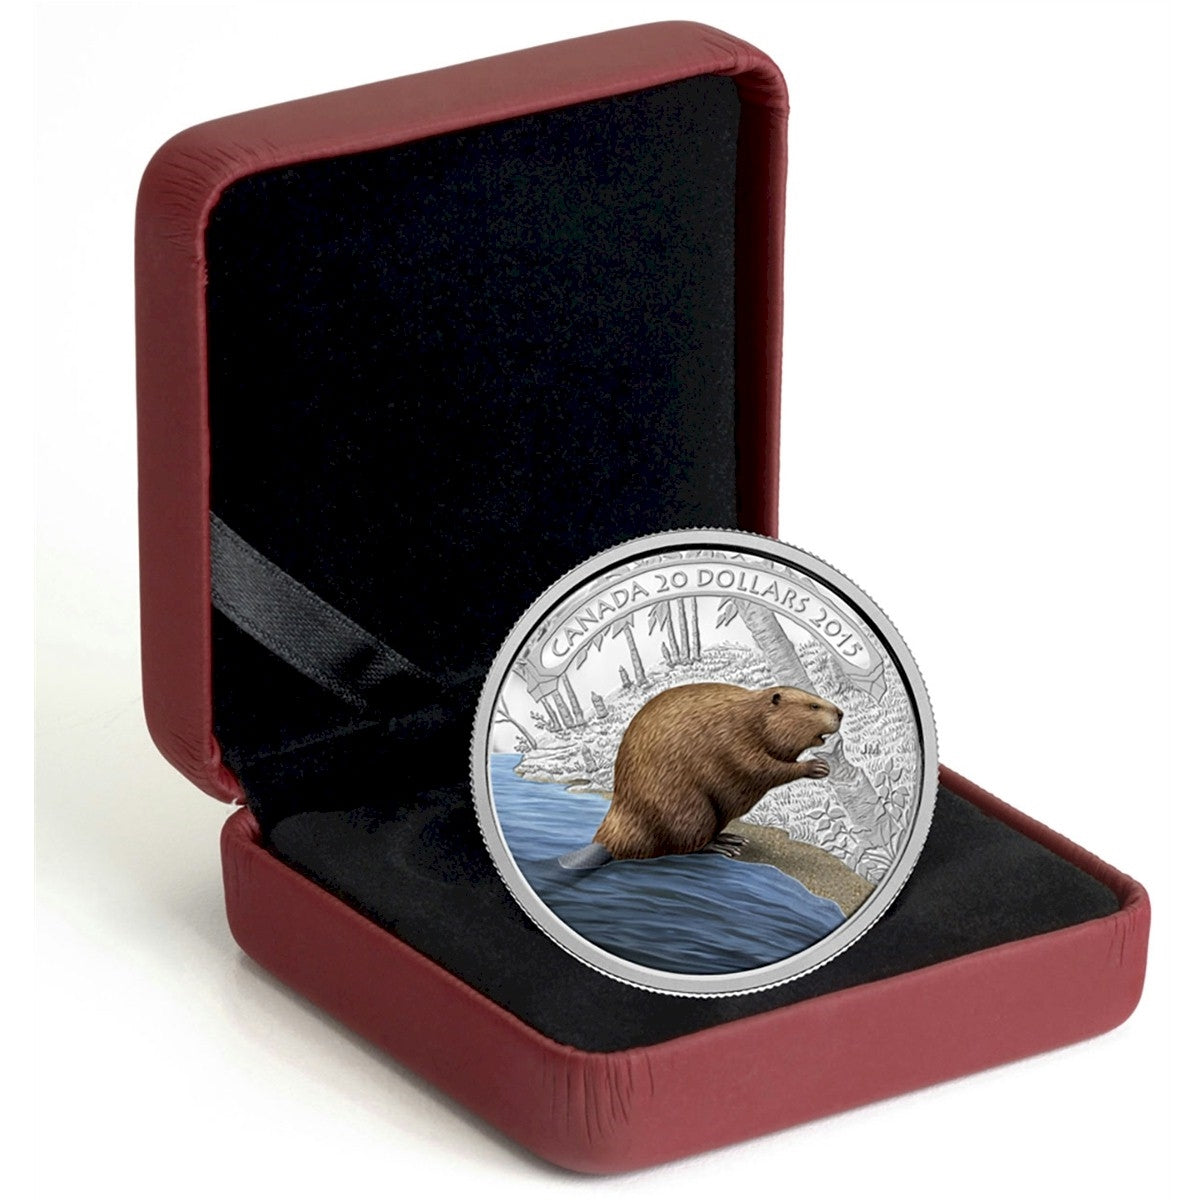 2015 Canada $20 Beaver at Work Fine Silver Coin (TAX Exempt) 130637